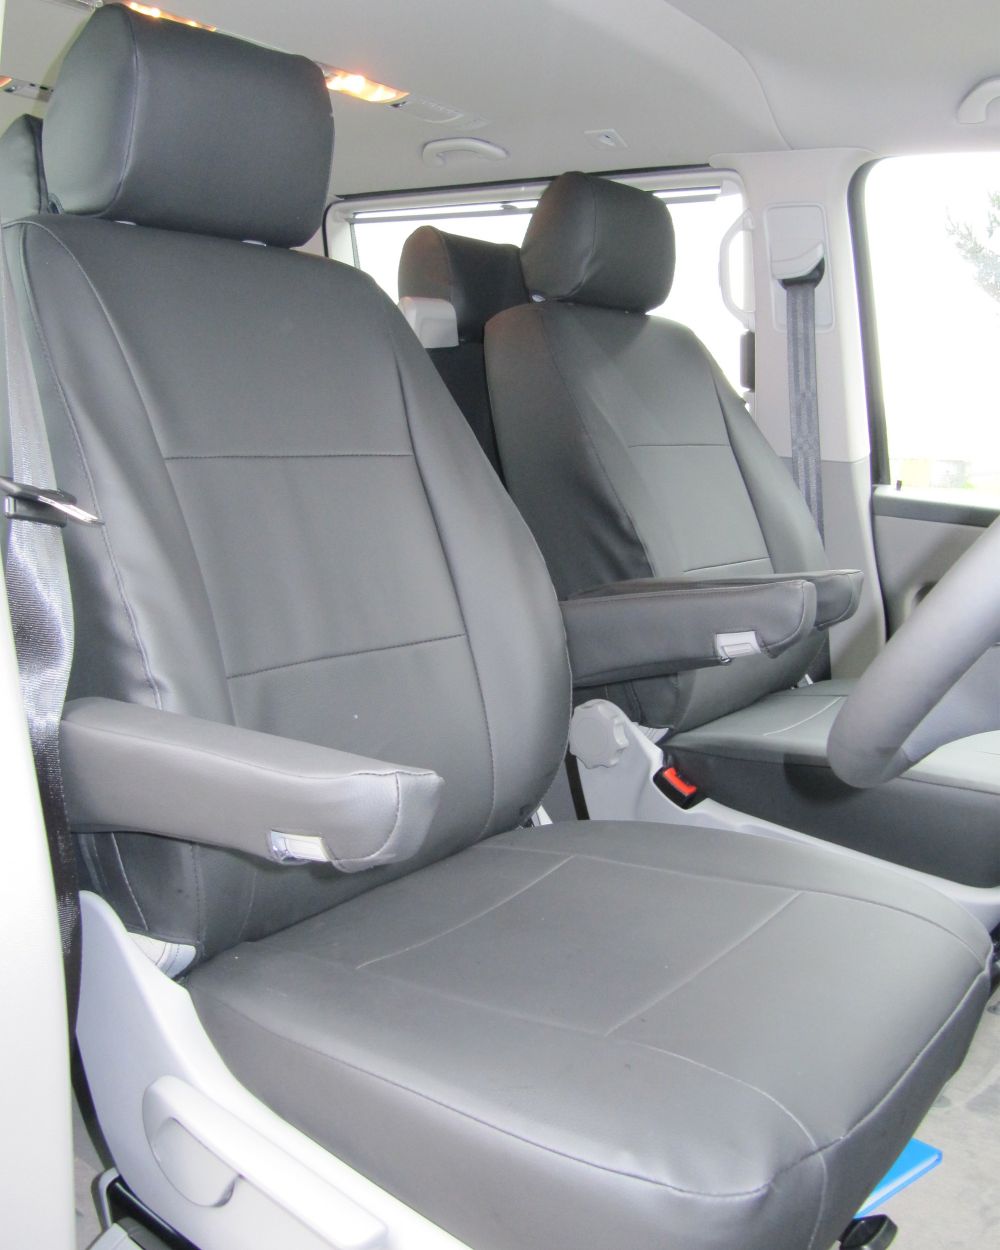 MERCEDES SPRINTER 2ND GEN 17 SEATER seat covers